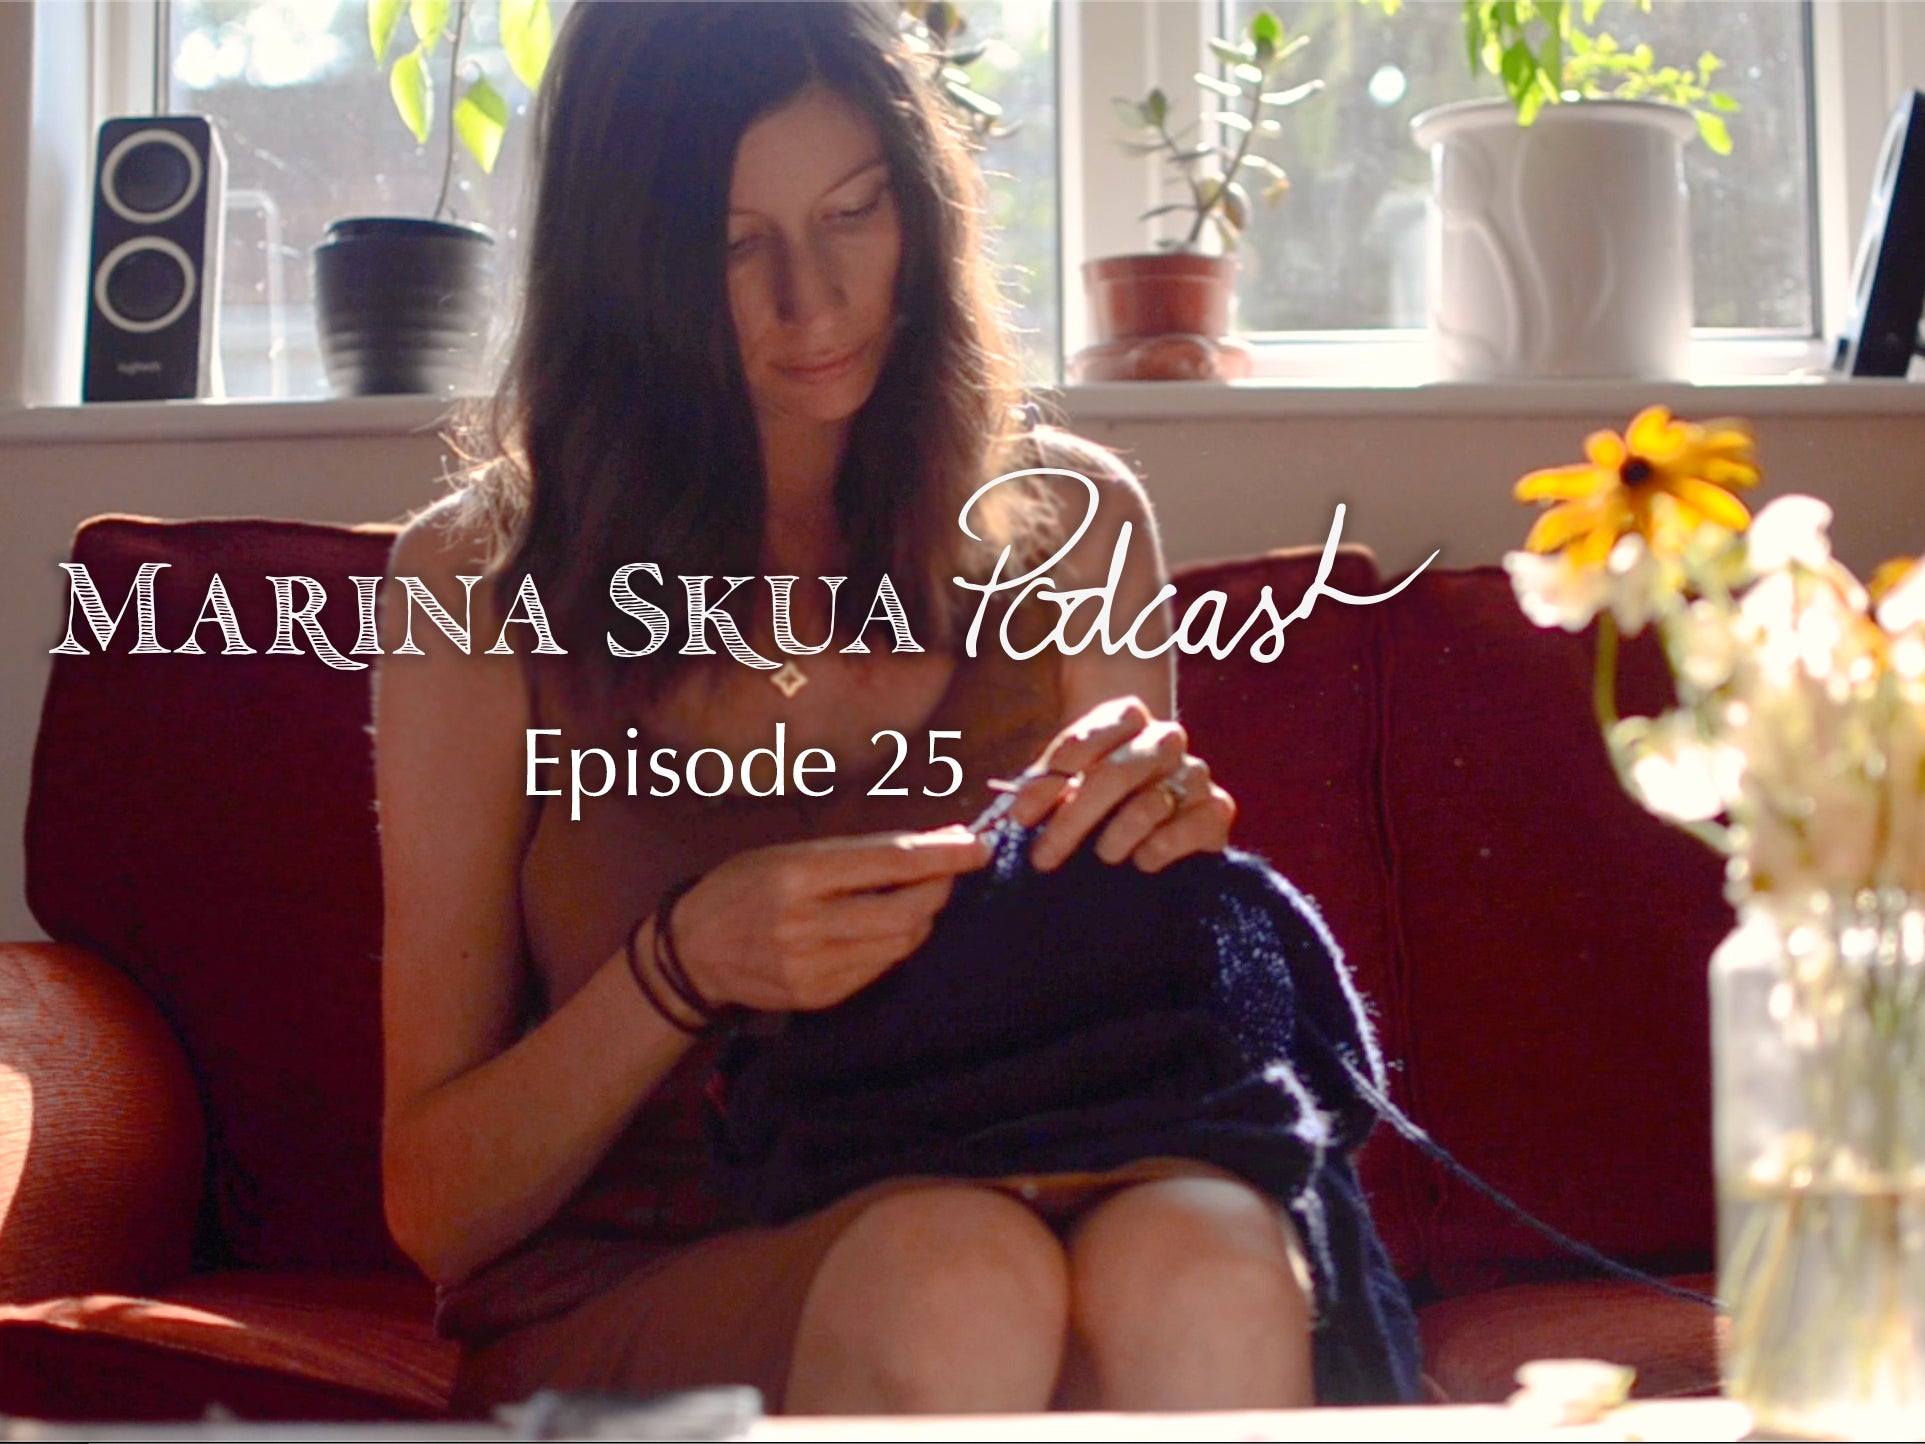 Episode 25 of the Podcast – September sunlight, knitting again, and leaf embroidery on an old shirt